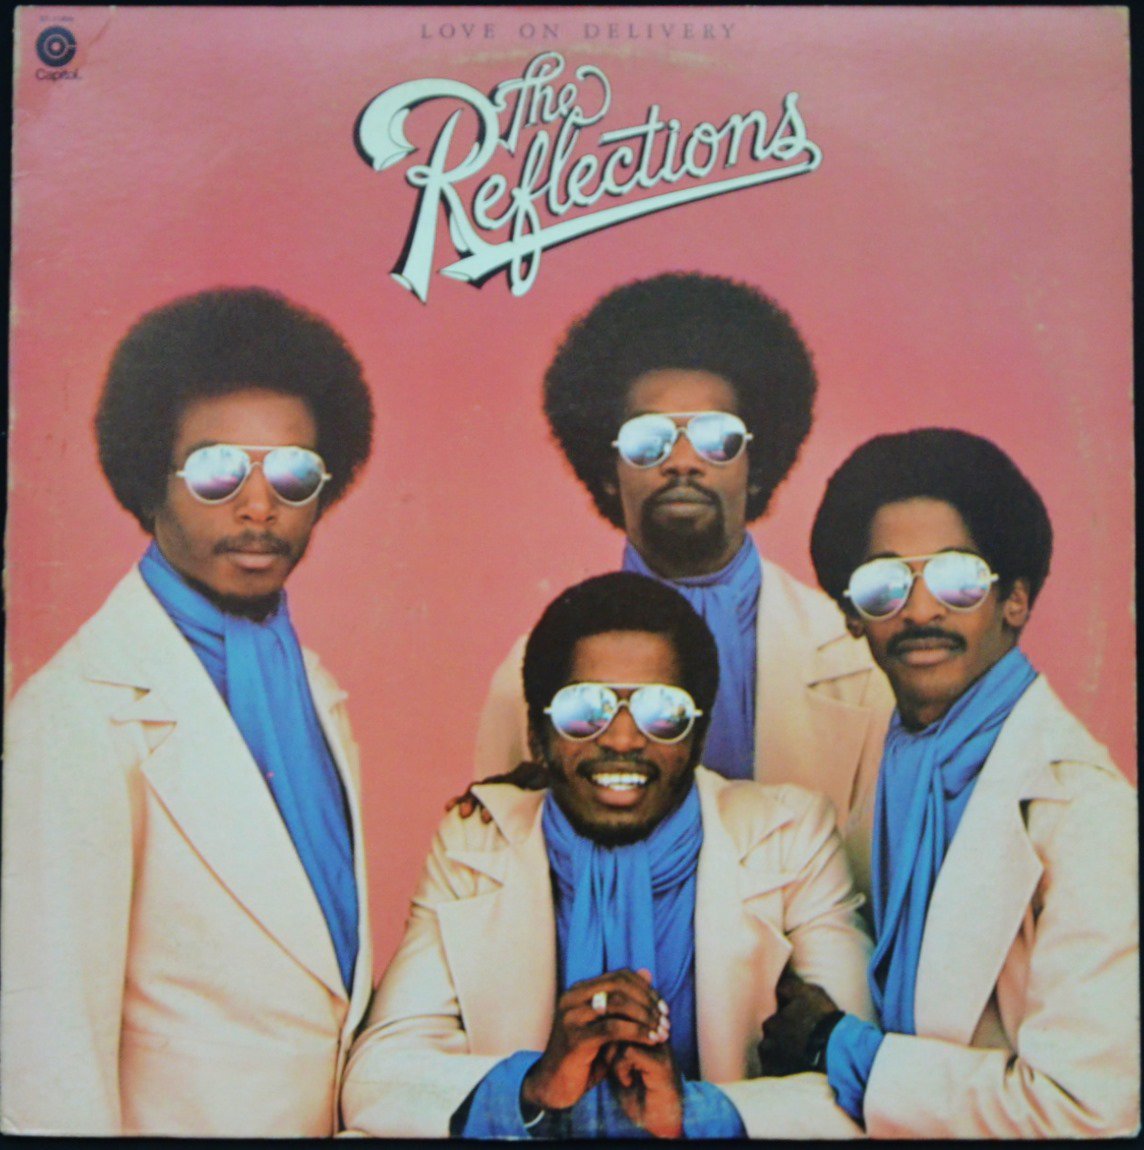 THE REFLECTIONS / LOVE ON DELIVERY (LP)